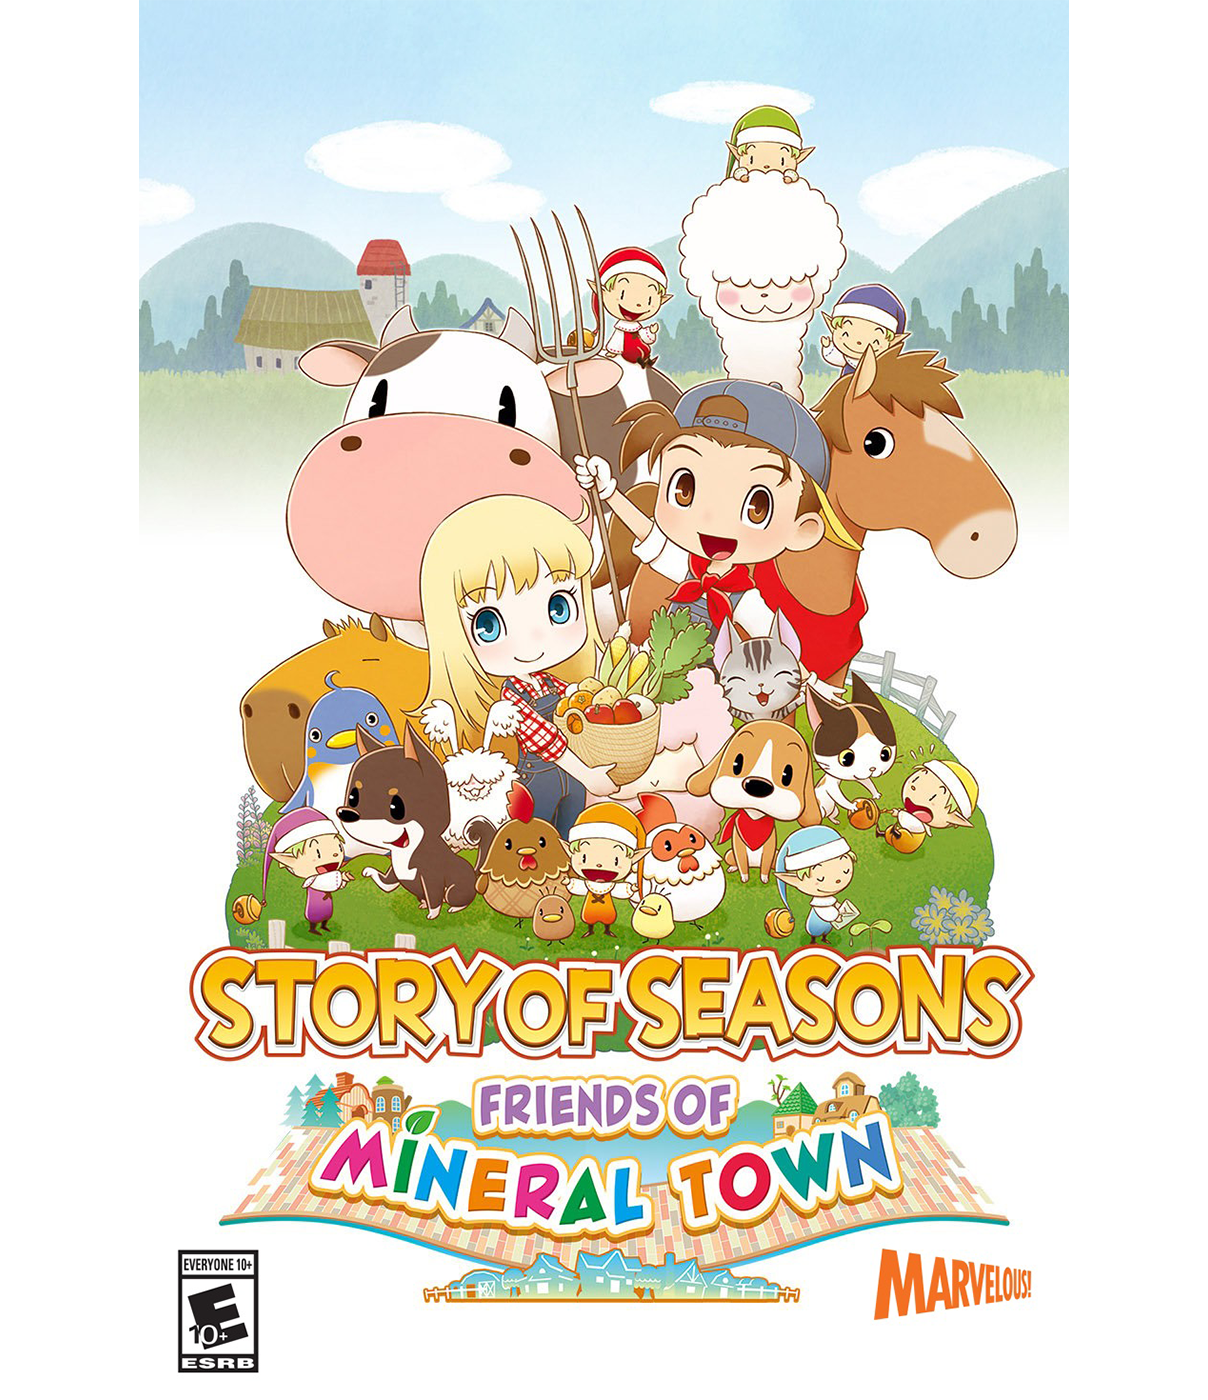 OF SEASONS: XSEED | of Town Mineral Games STORY Friends